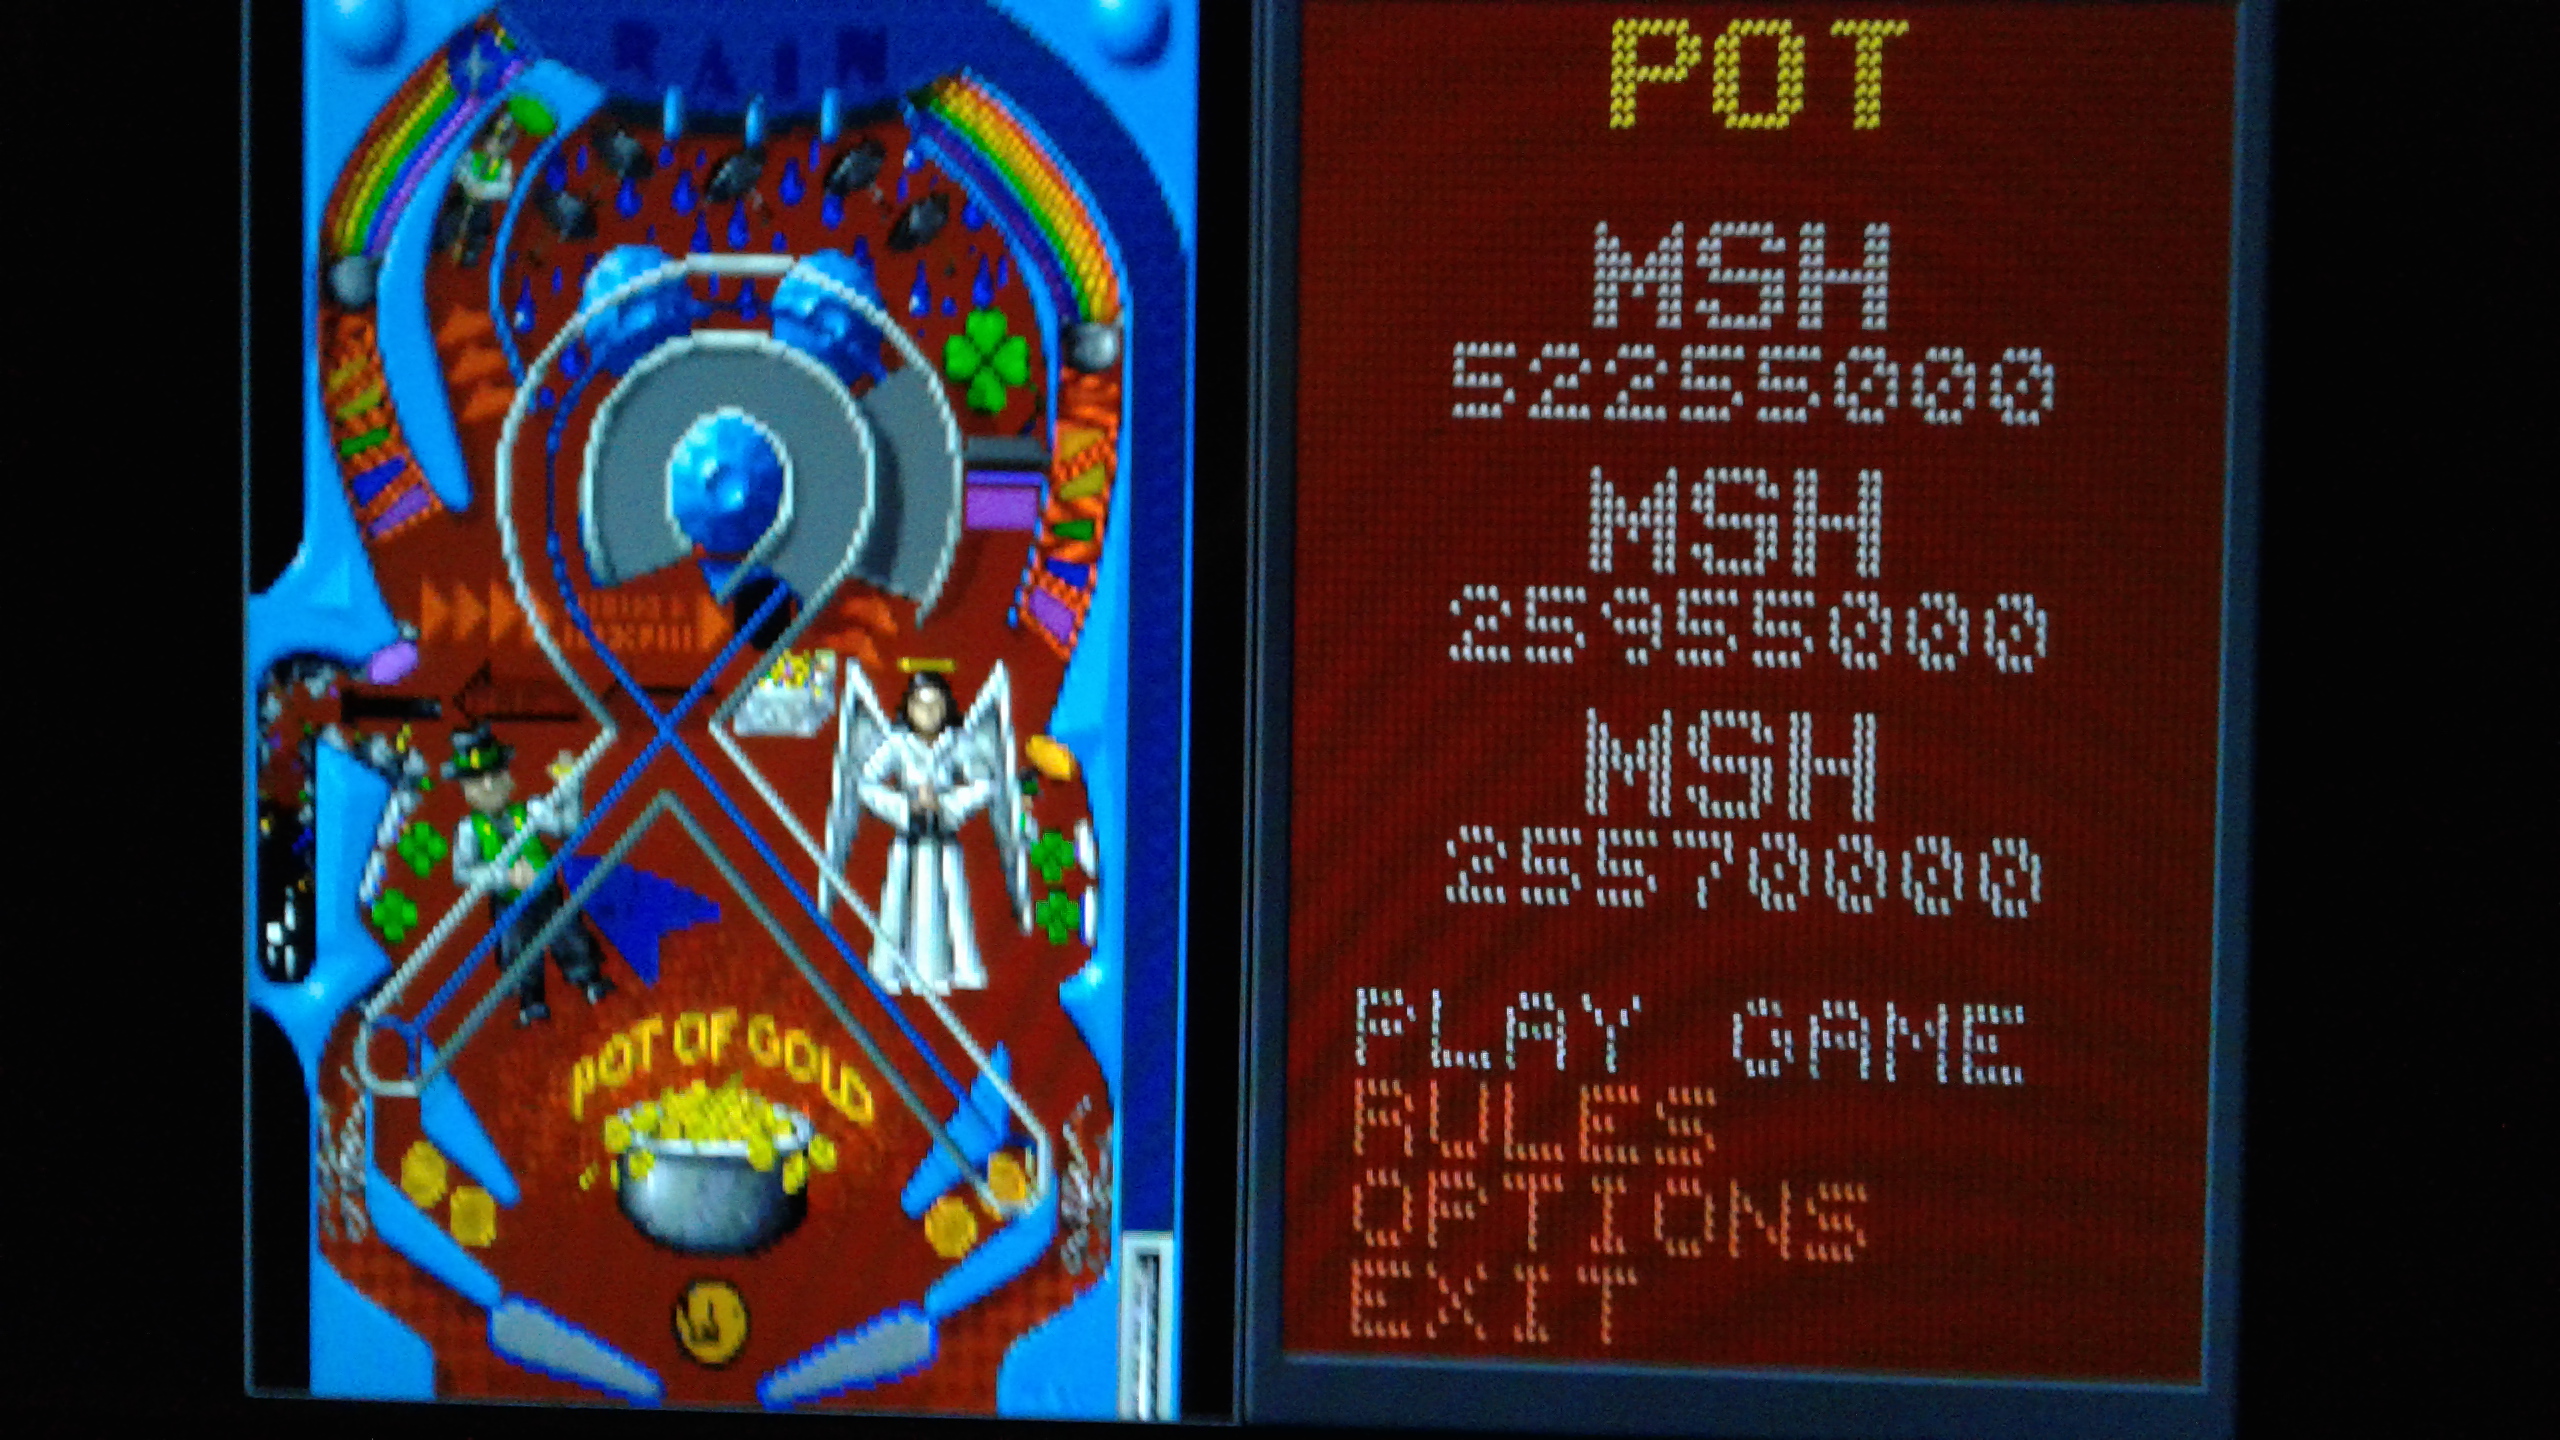 Mark: Epic Pinball: Pot of Gold (PC Emulated / DOSBox) 52,255,000 points on 2019-05-11 22:55:28